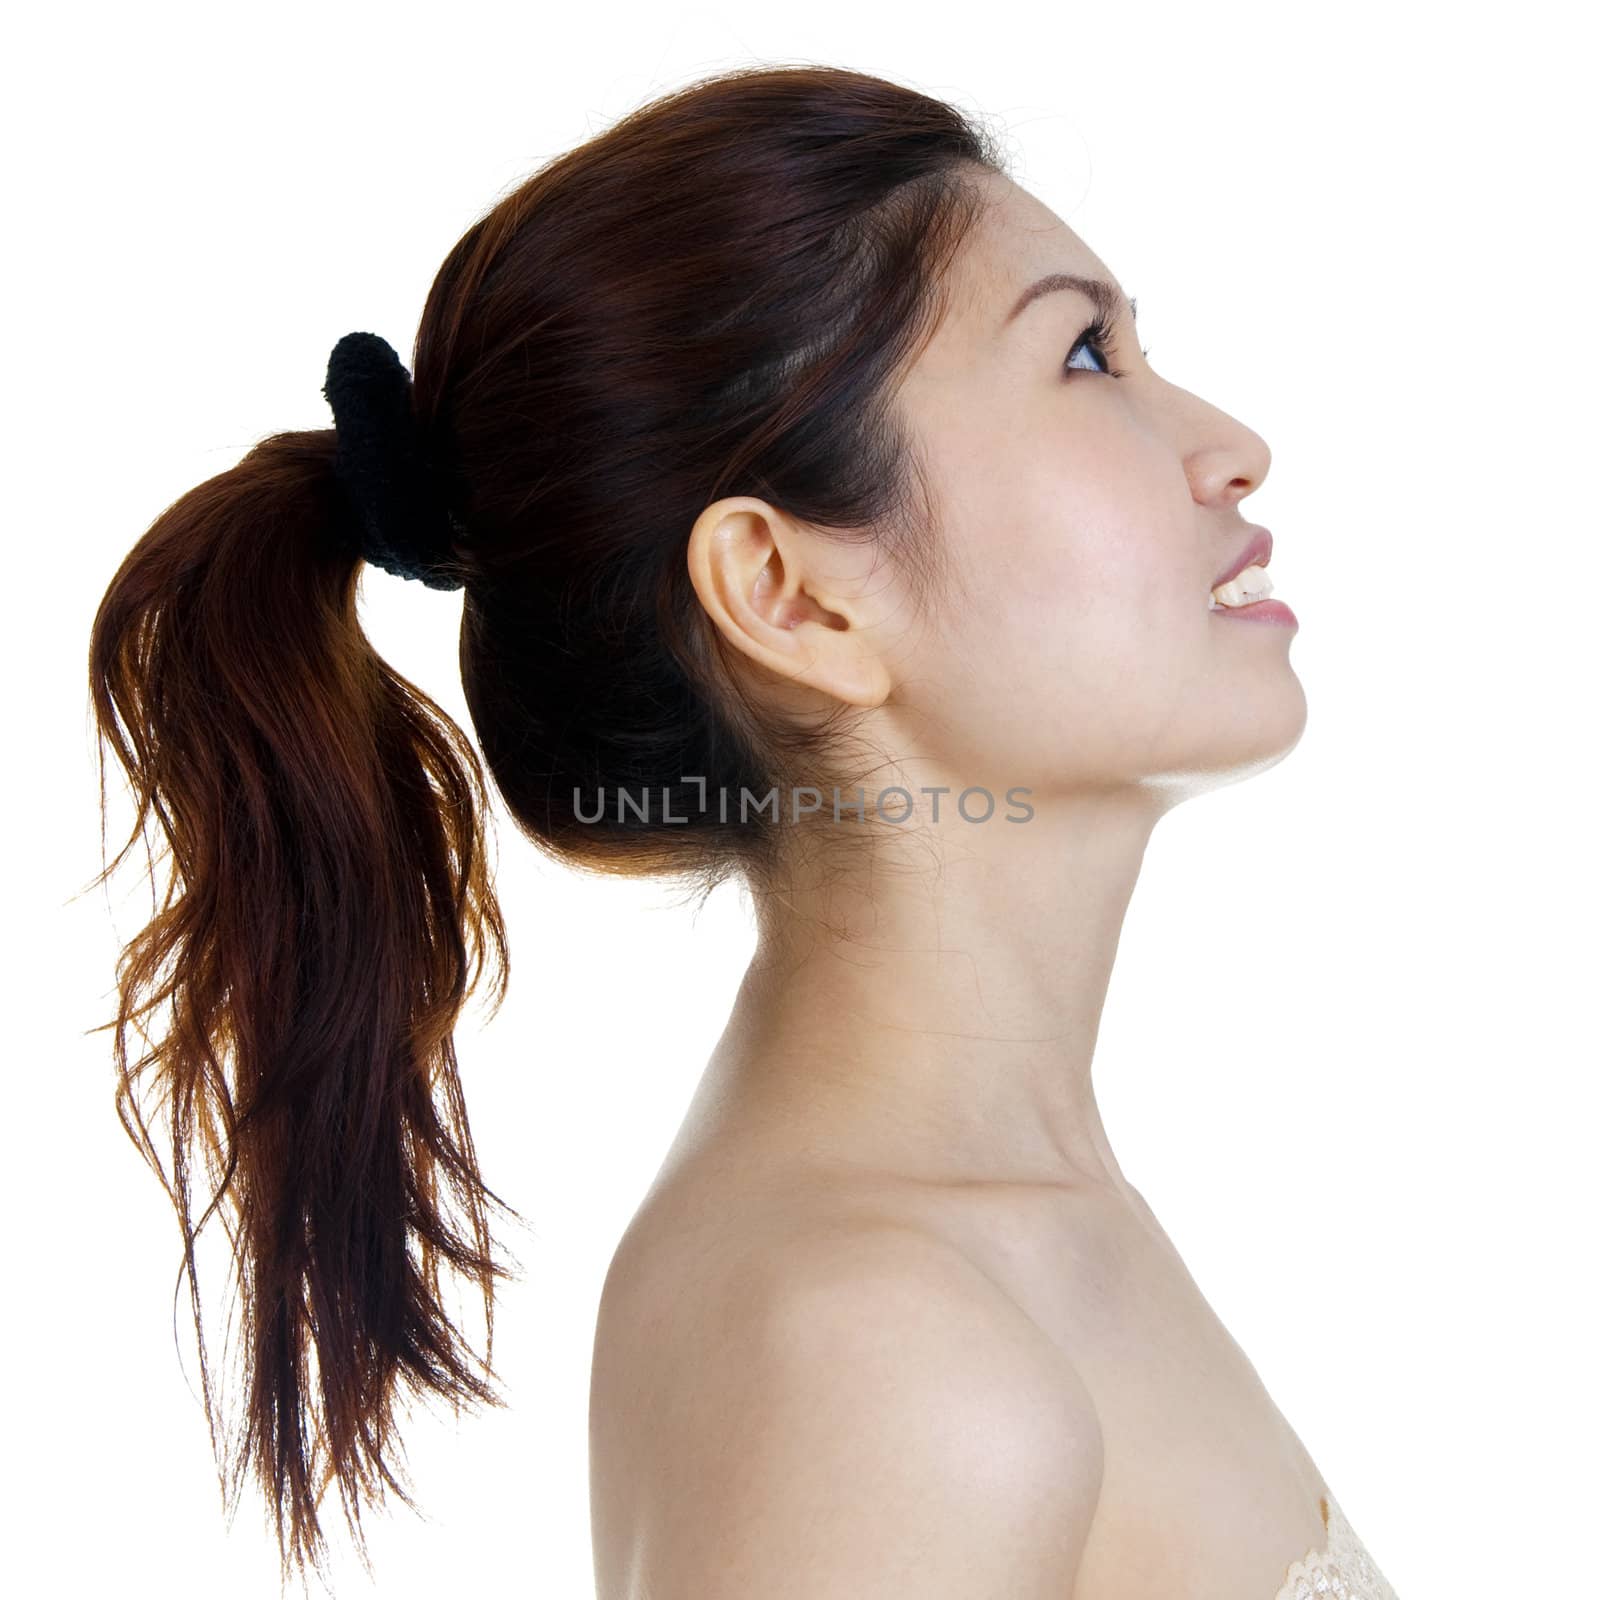 Profile of beautiful woman isolated on white background